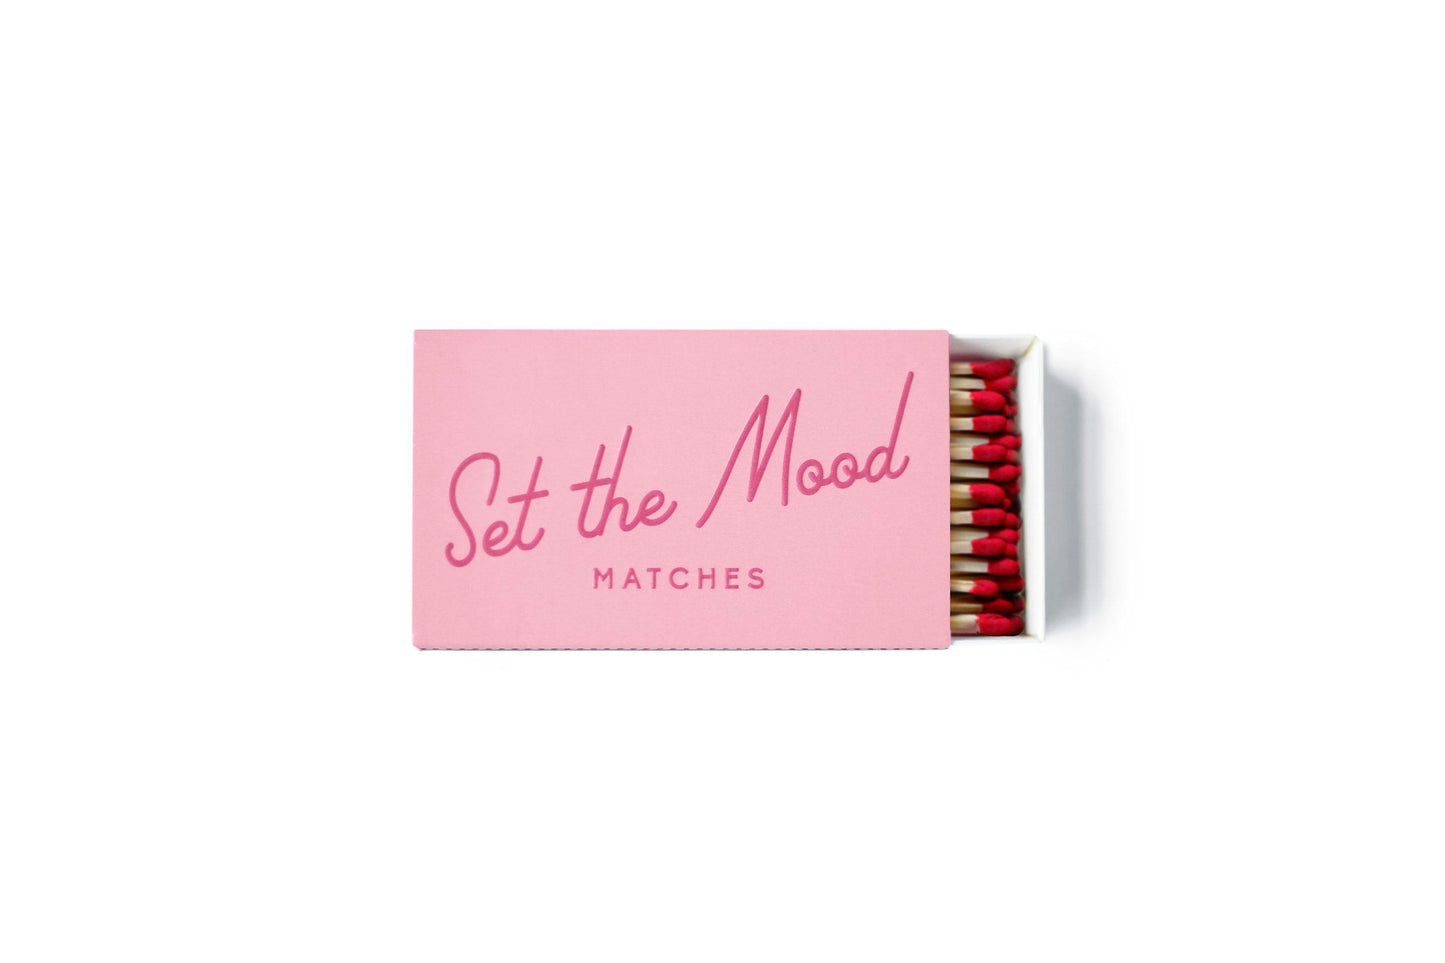 Matches - "Set the Mood" - pink colored box